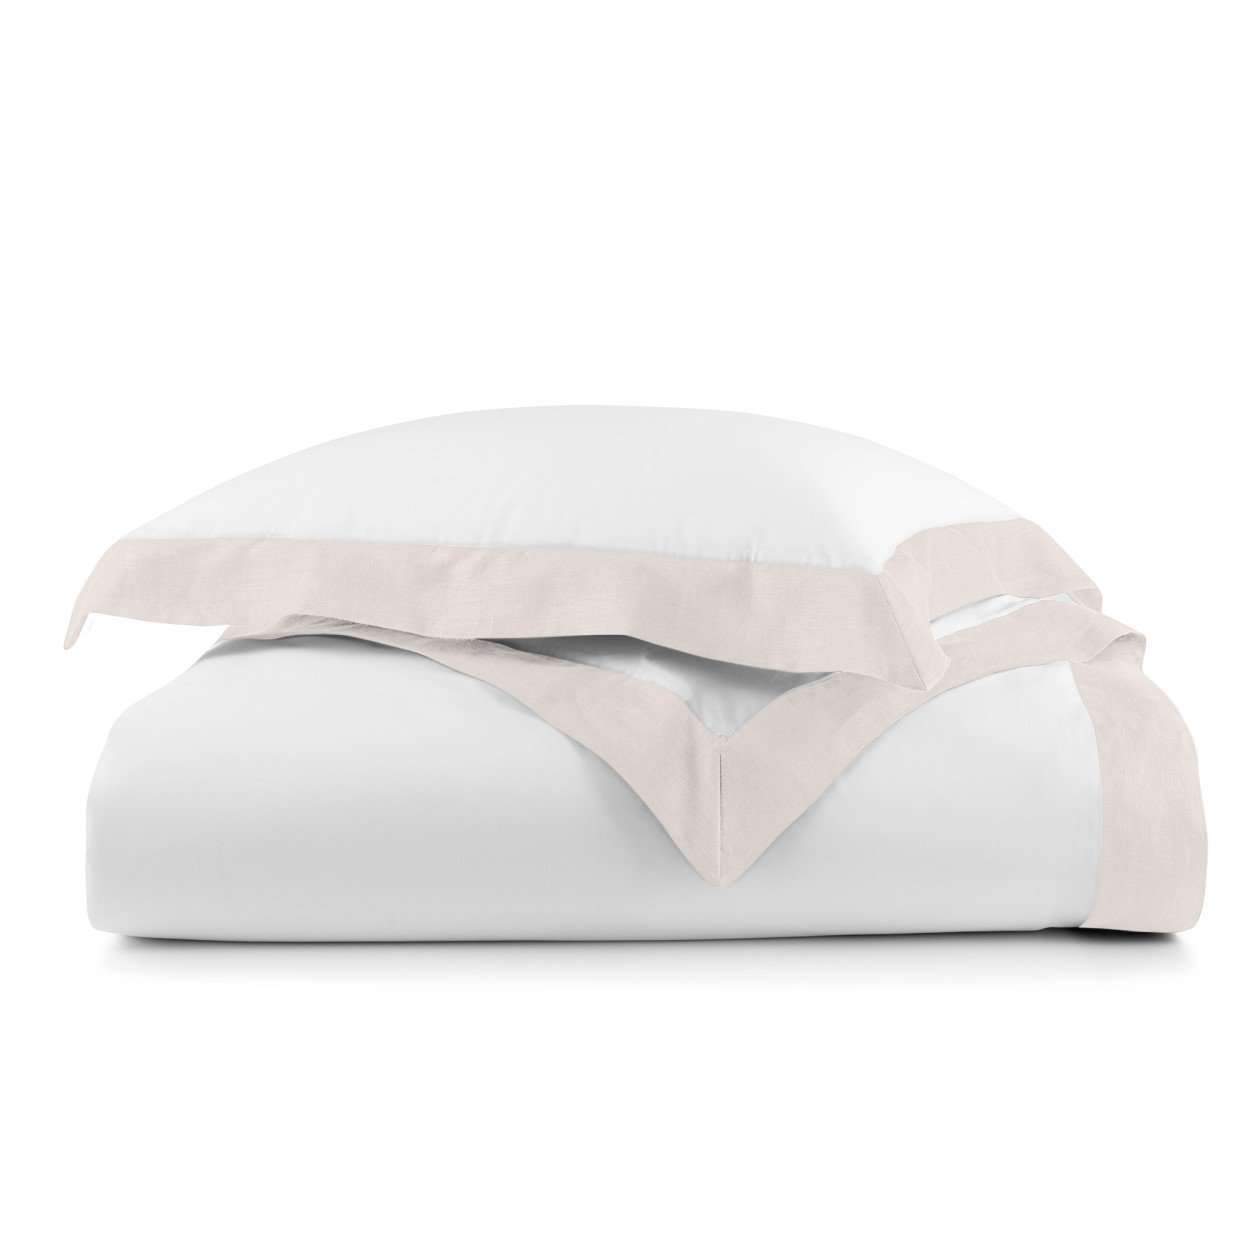 Duvet Covers Mandalay Linen Cuff Duvet Cover by Peacock Alley Twin / Blush Peacock Alley